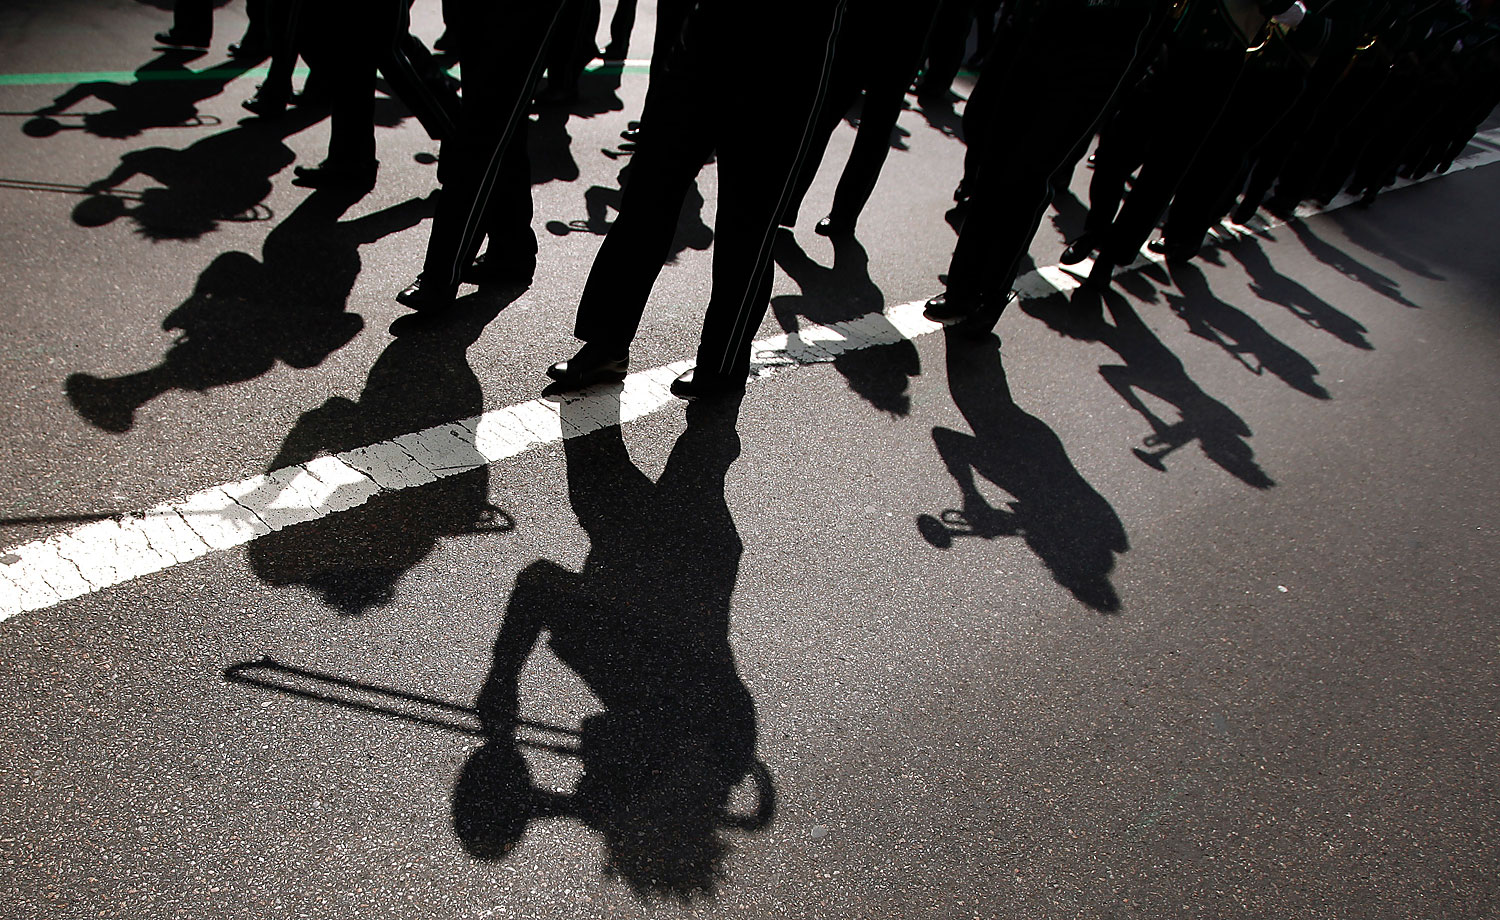 A marching band casts shadows on the road during the 251st annual St. Patrick's Day Parade in New York, March 17, 2012. (Carlo Allegri—Reuters)